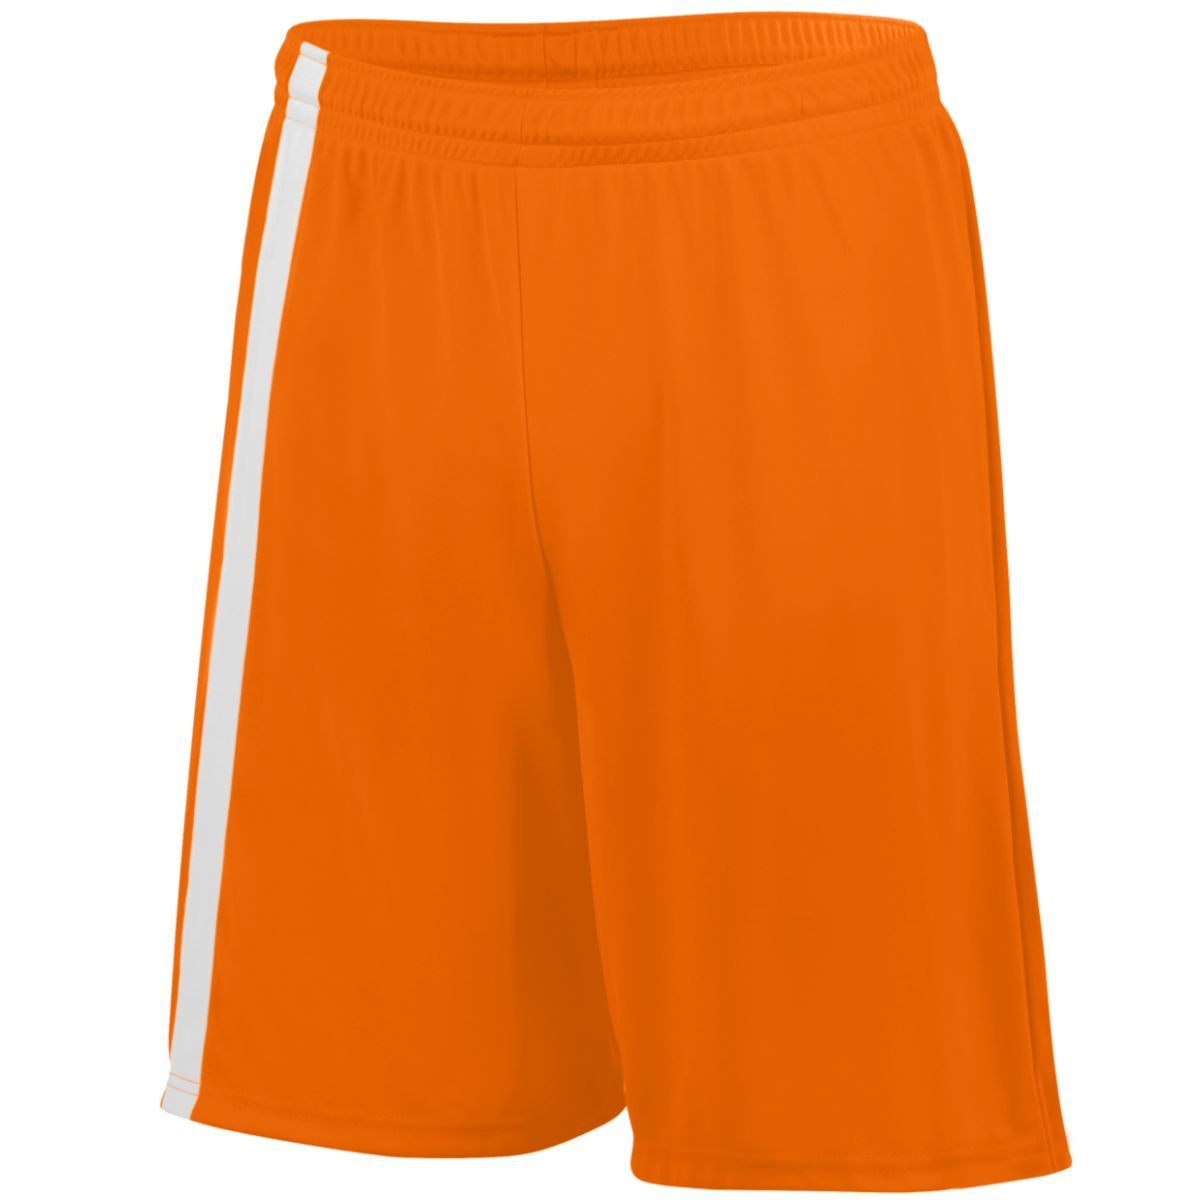 Augusta Sportswear Youth Attacking Third Shorts in Power Orange/White  -Part of the Youth, Youth-Shorts, Augusta-Products, Soccer, All-Sports-1 product lines at KanaleyCreations.com